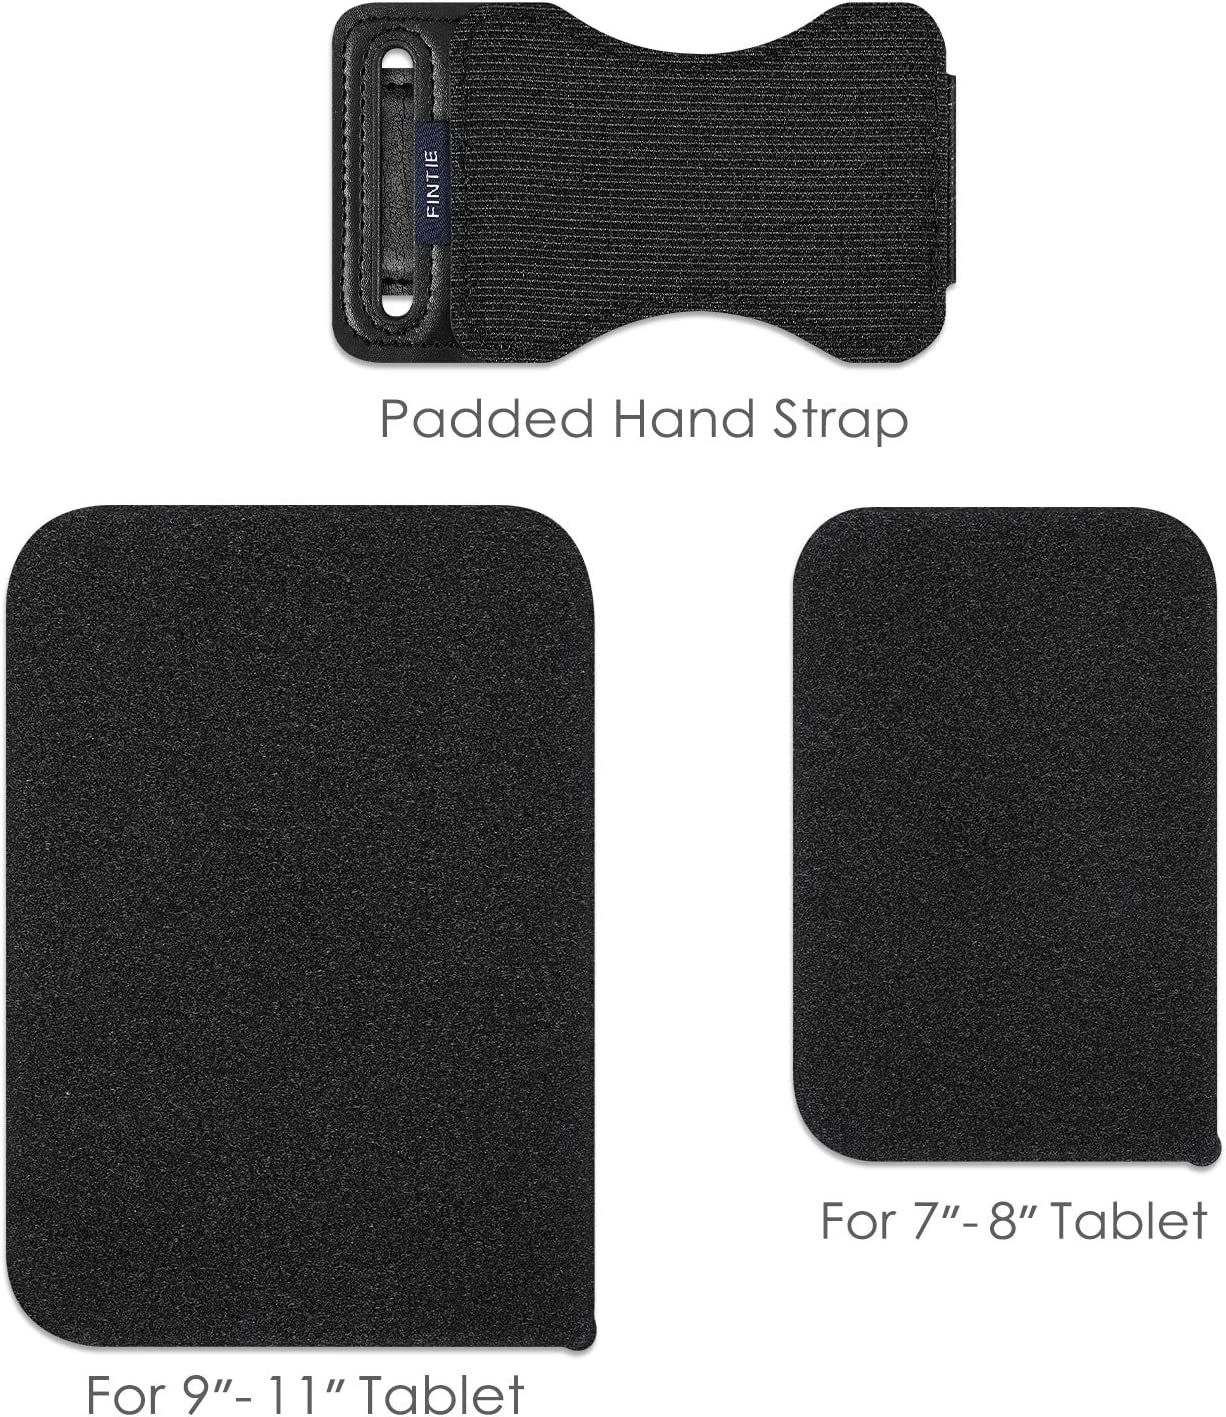 the fintie universal tablet hand strap featured in different sizes